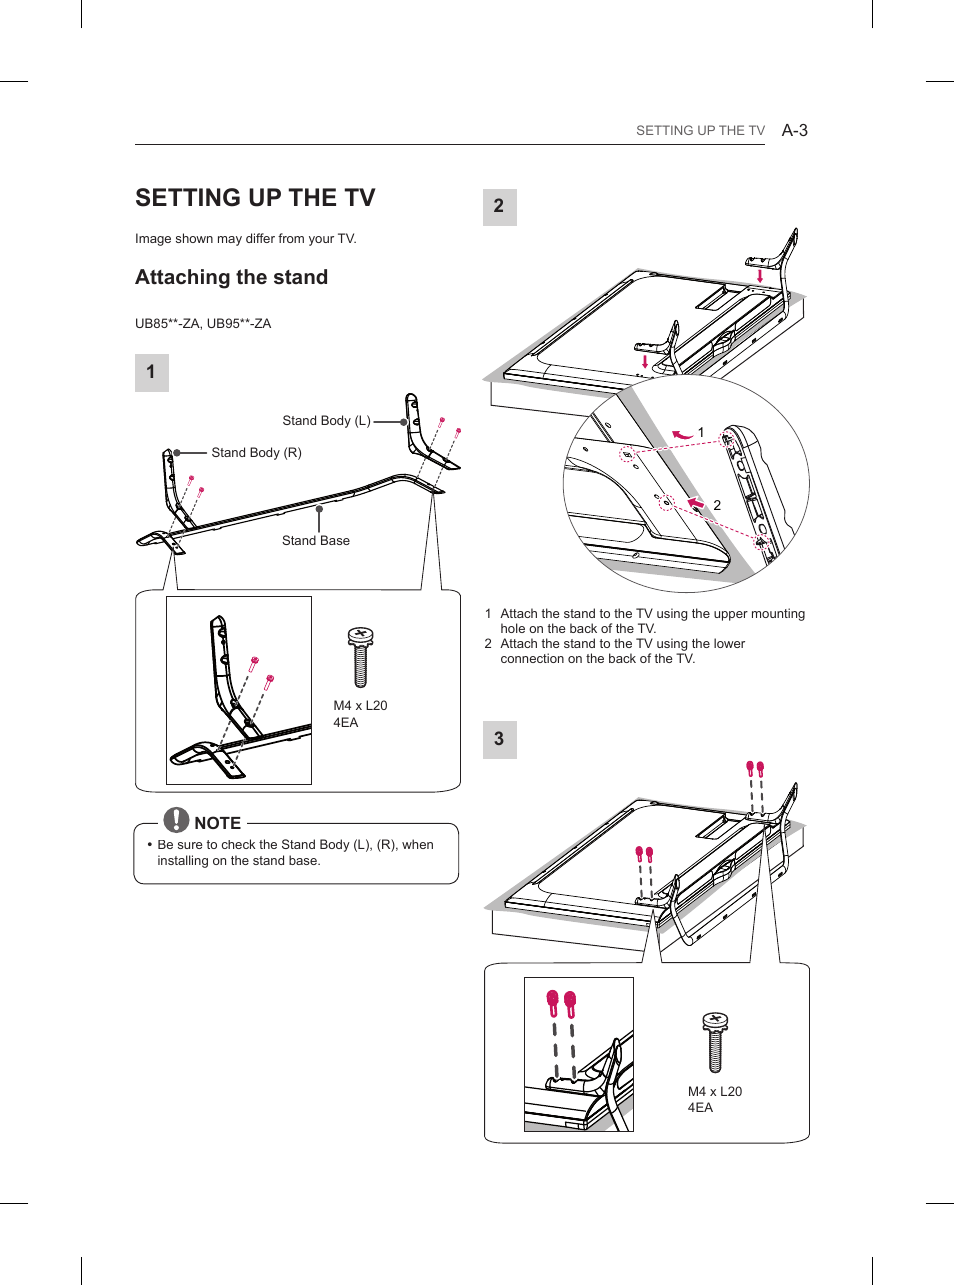 Setting up the tv, Attaching the stand | LG 84UB980V User Manual | Page 3 / 332